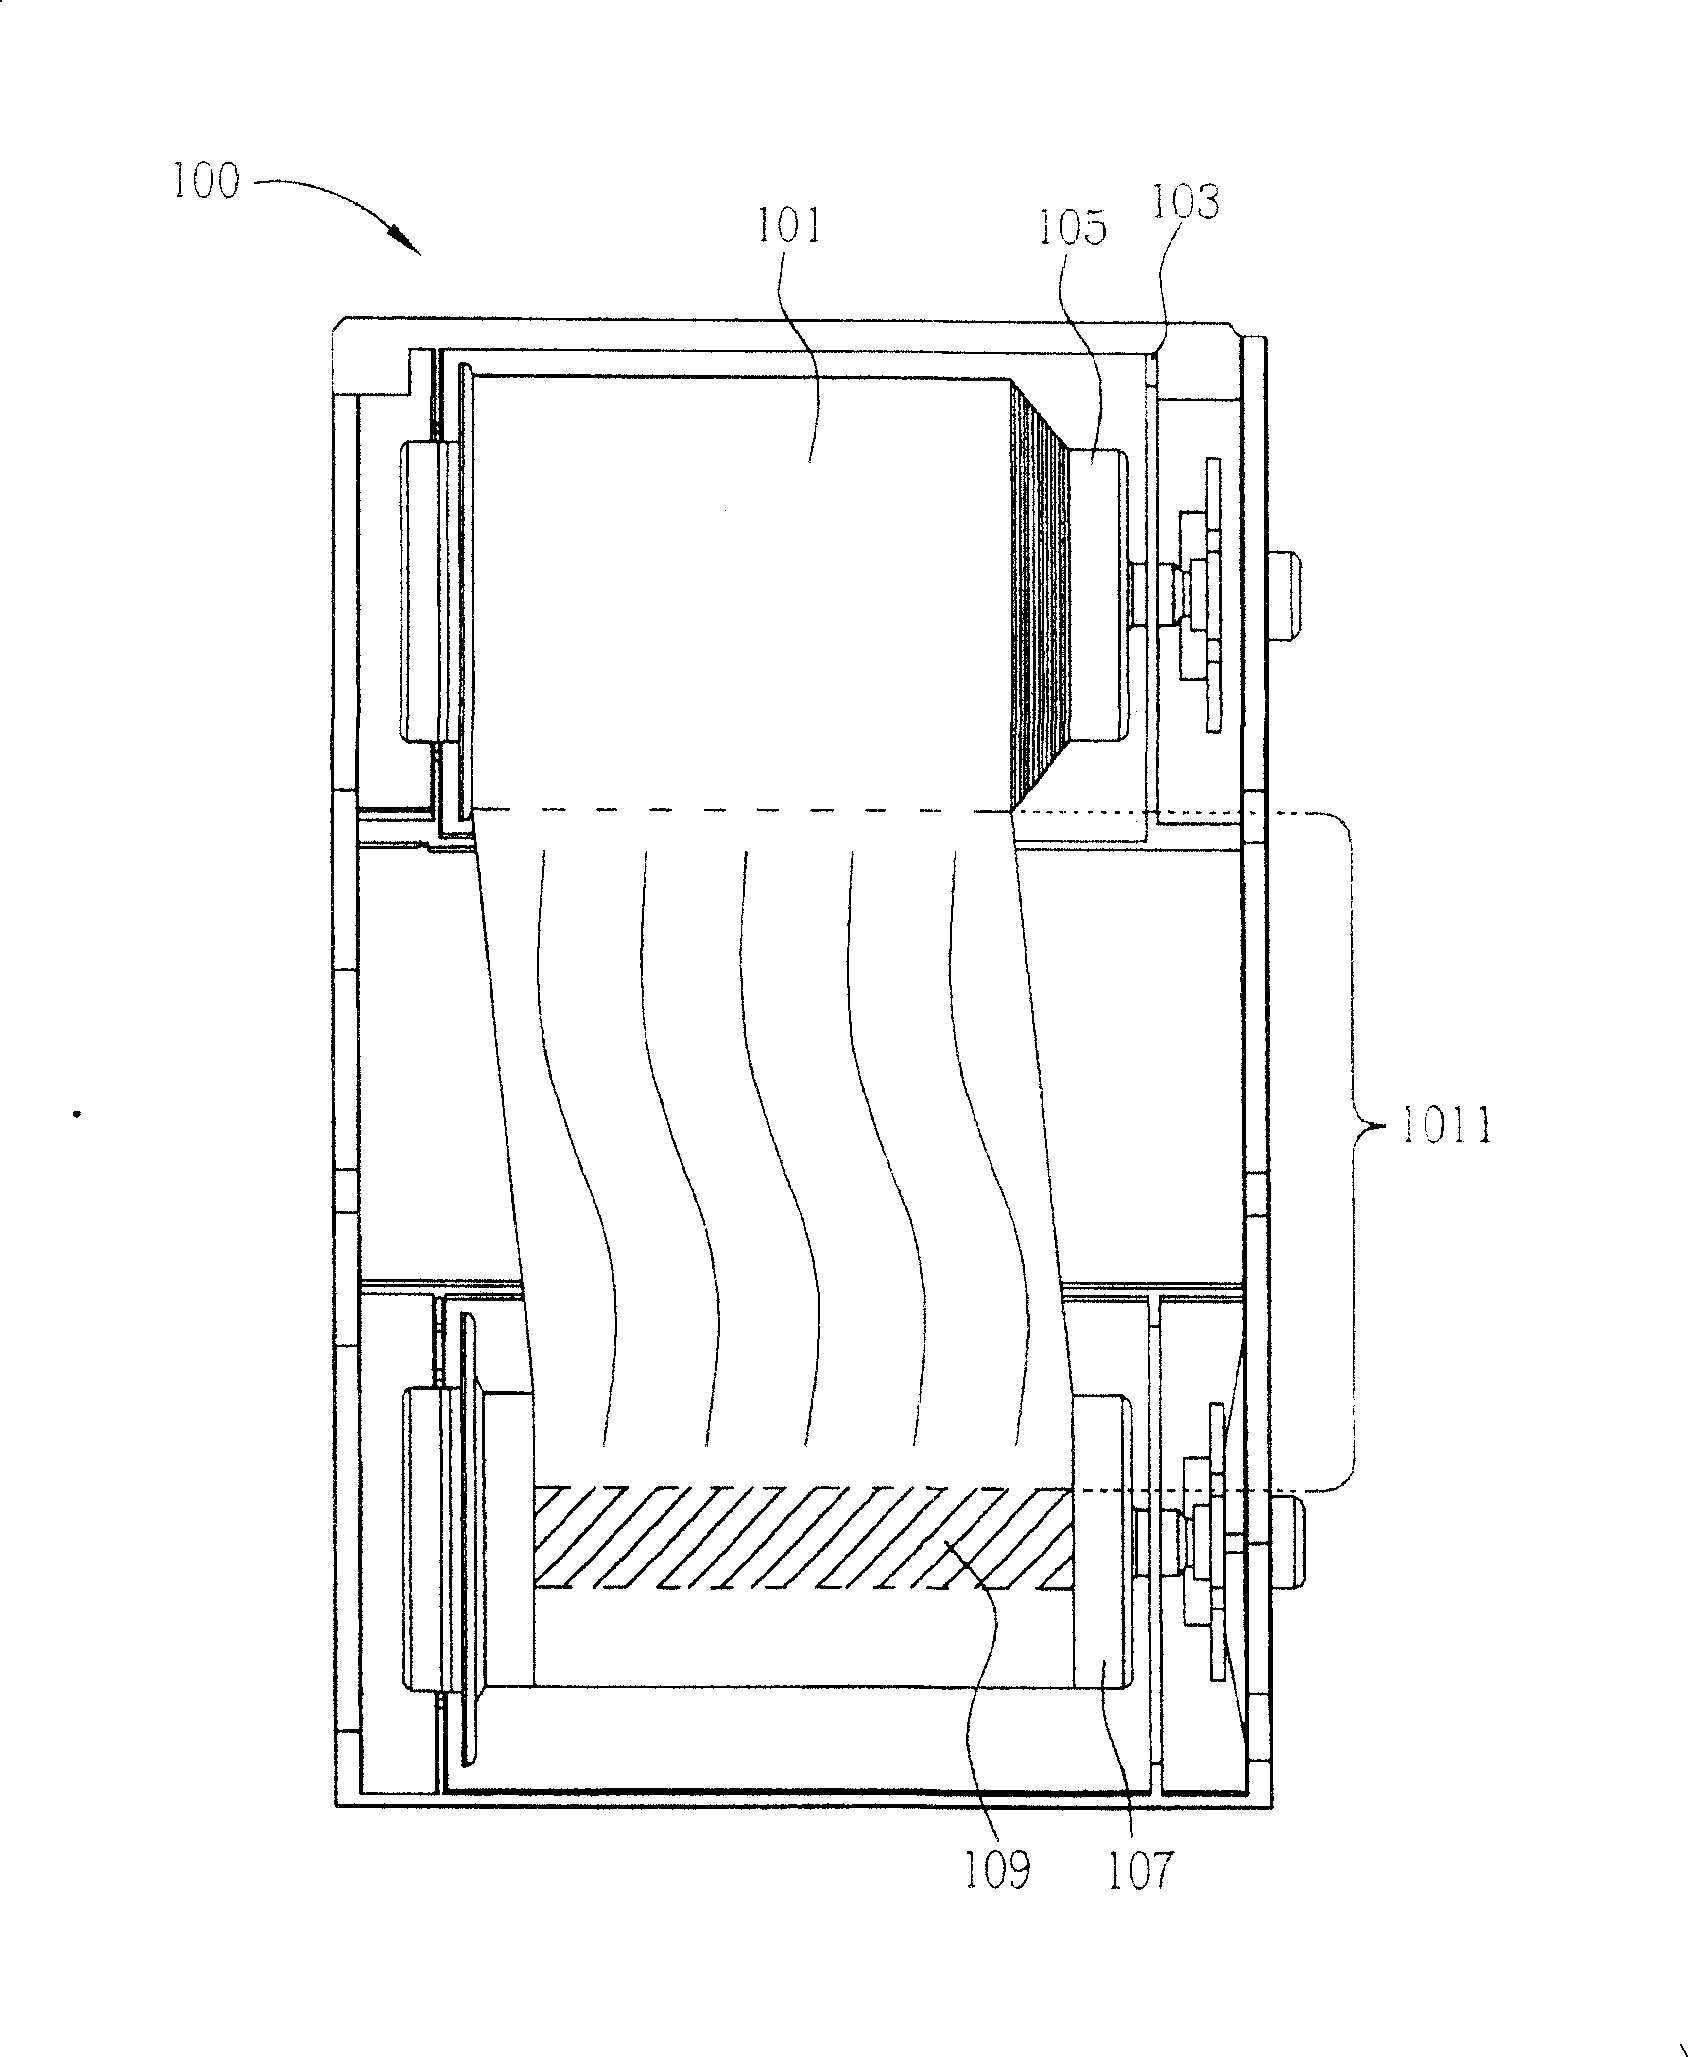 Ink-ribbon transfer device capable of fixing rotary roller